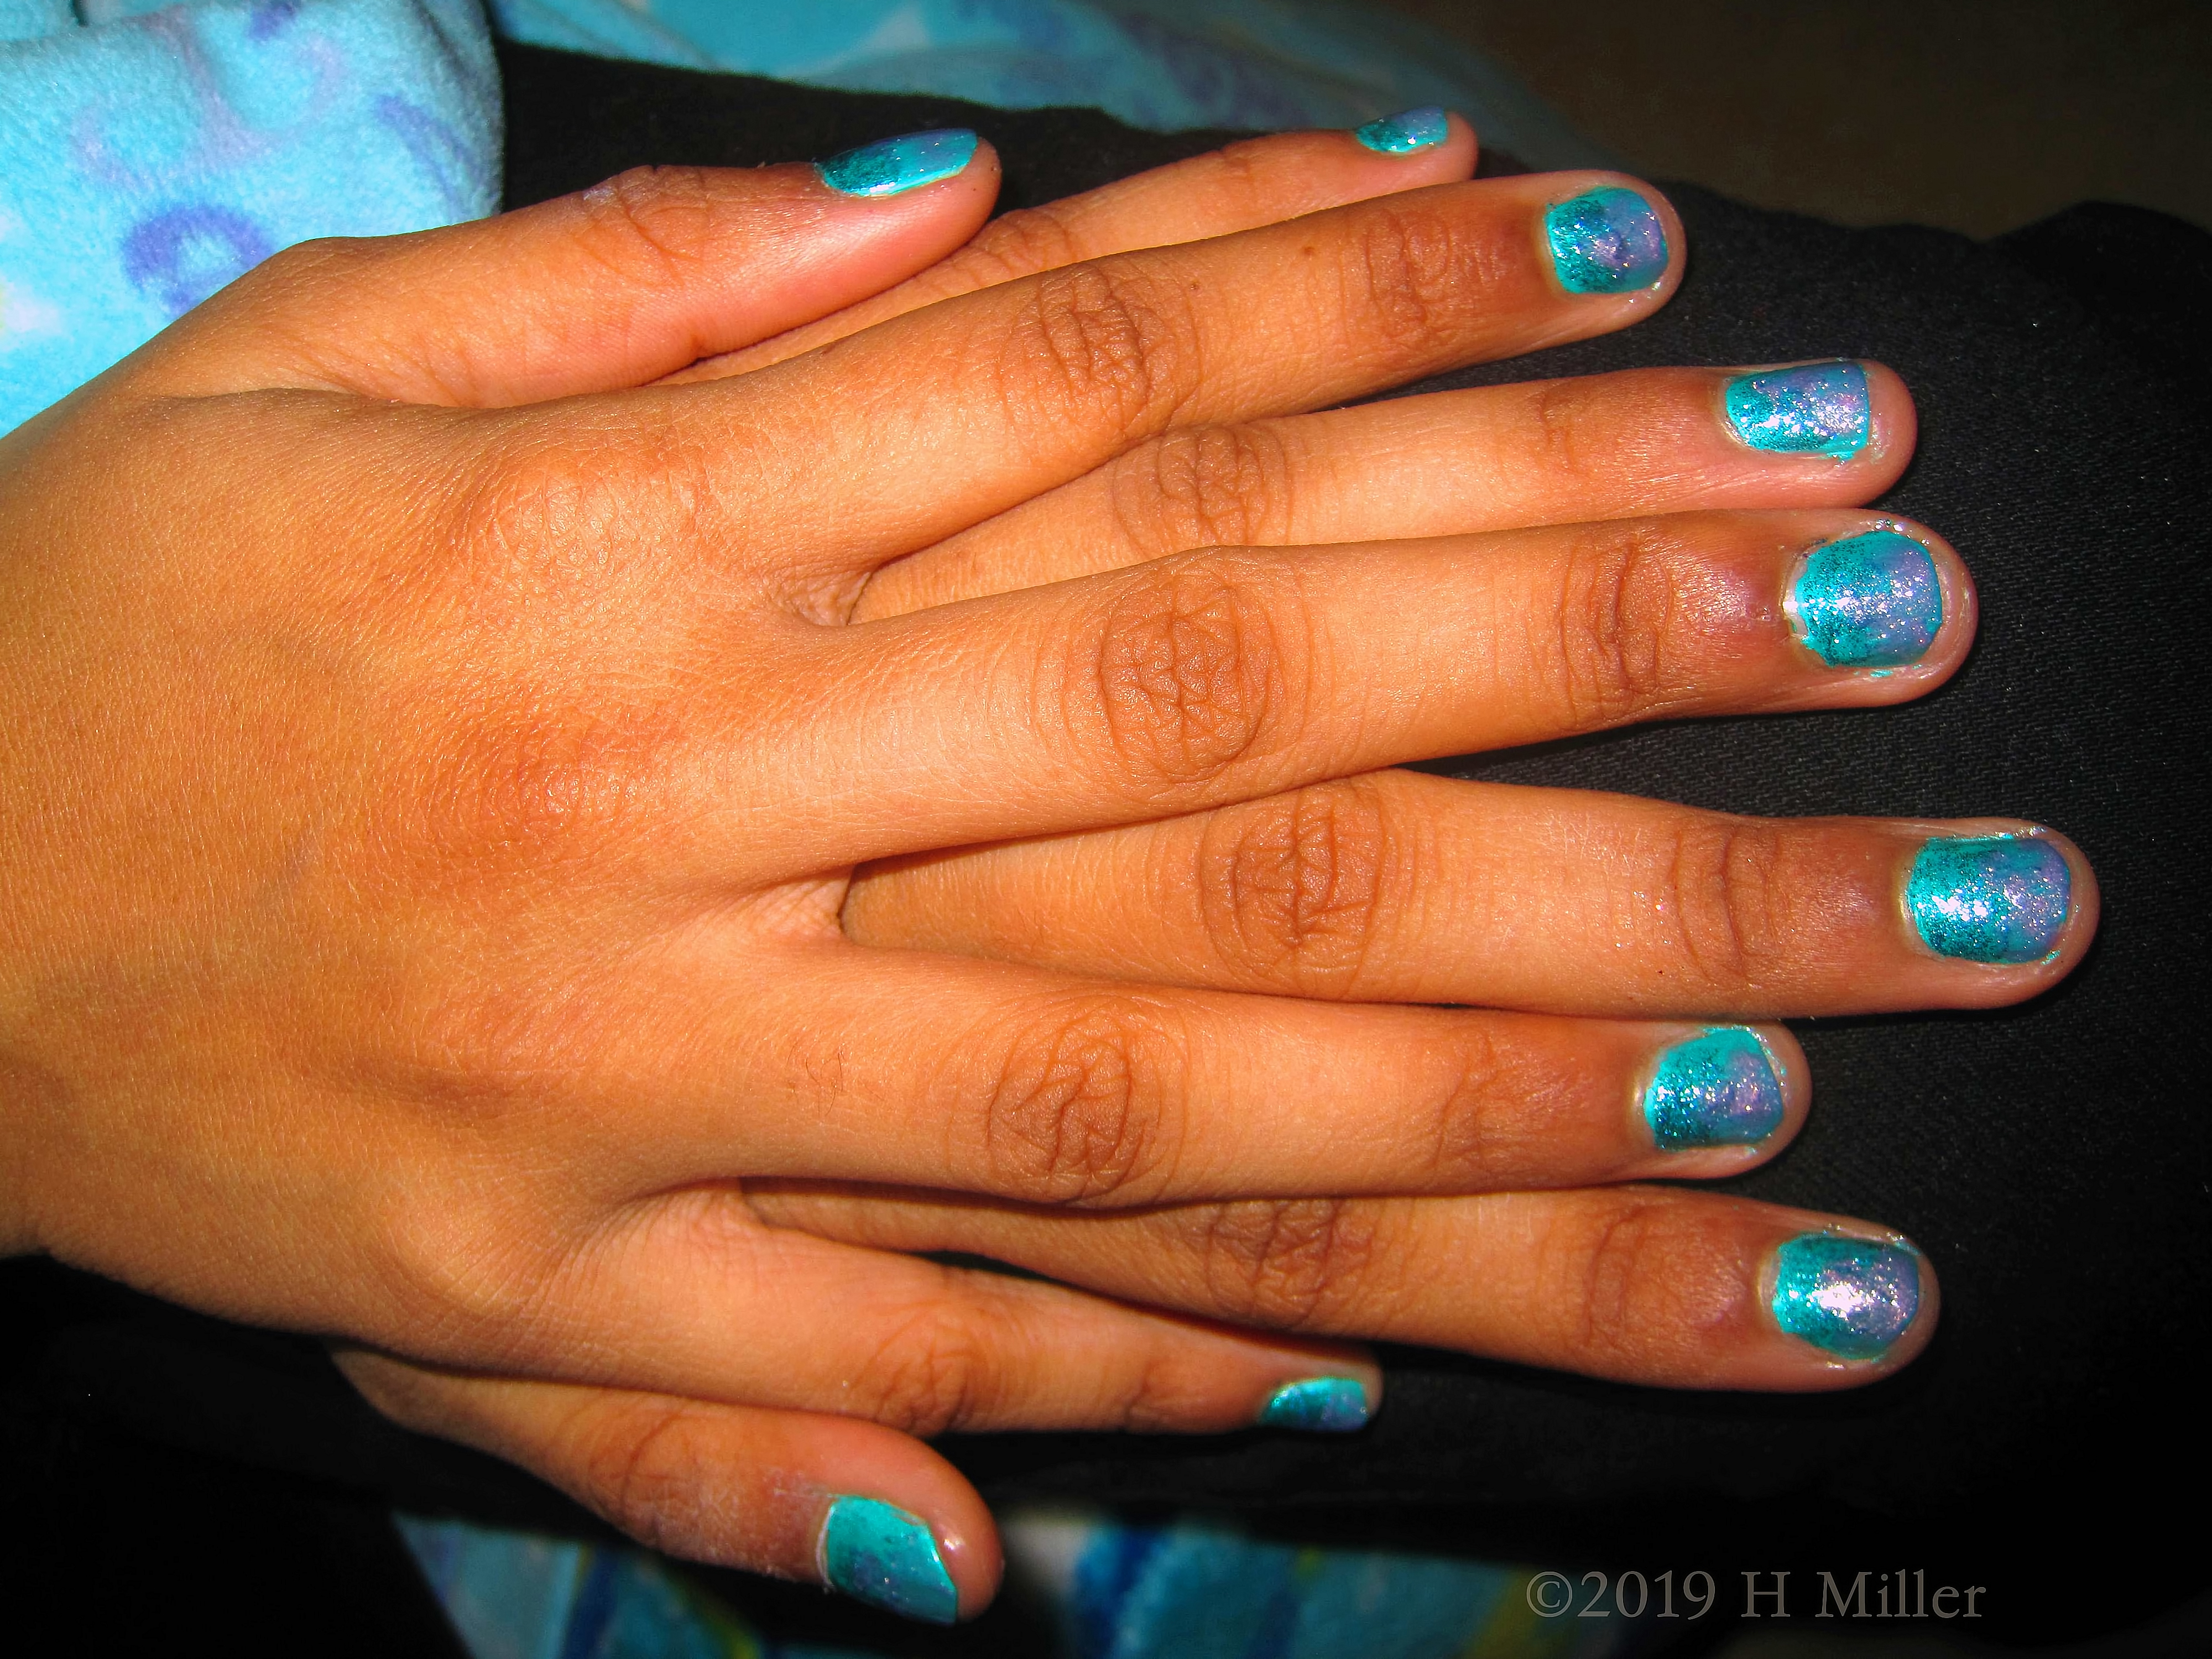 Shimmering Ombre! Blue And Purple Nail Design With Glitter Overlay For This Gorgeous Girls Manicure!